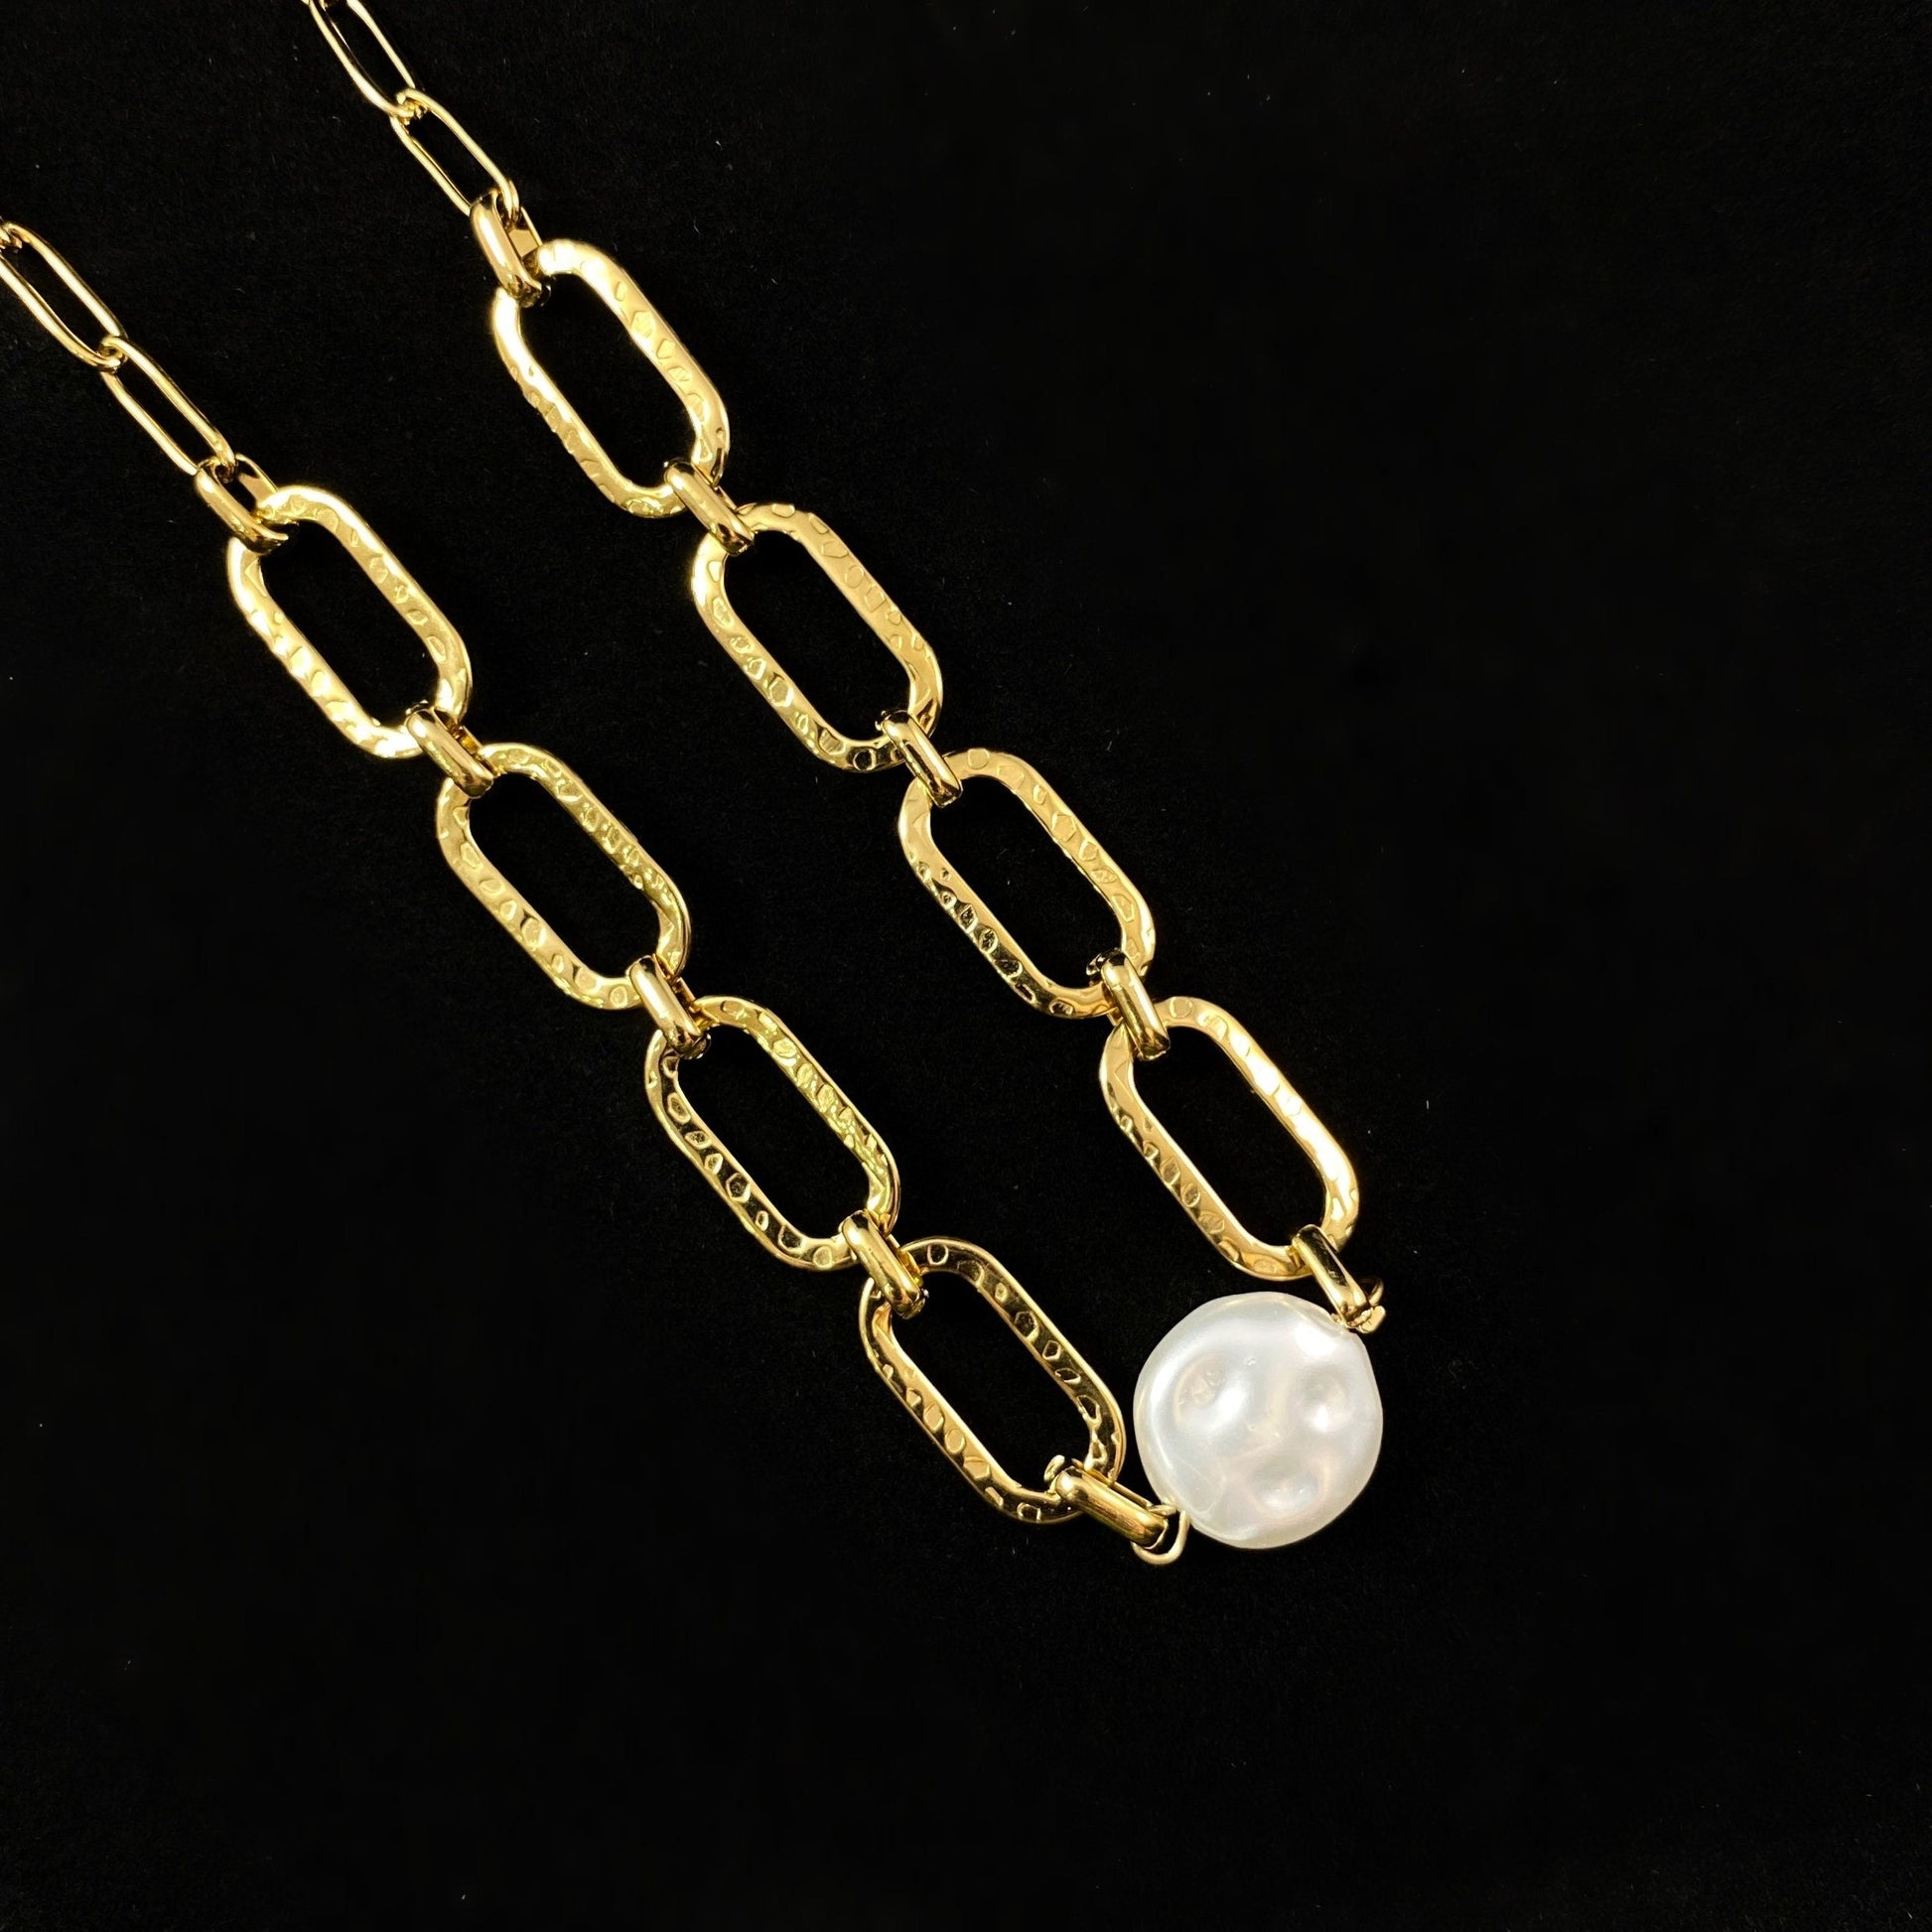 White Pearl Necklace with Hammered Gold Chain Link Accents